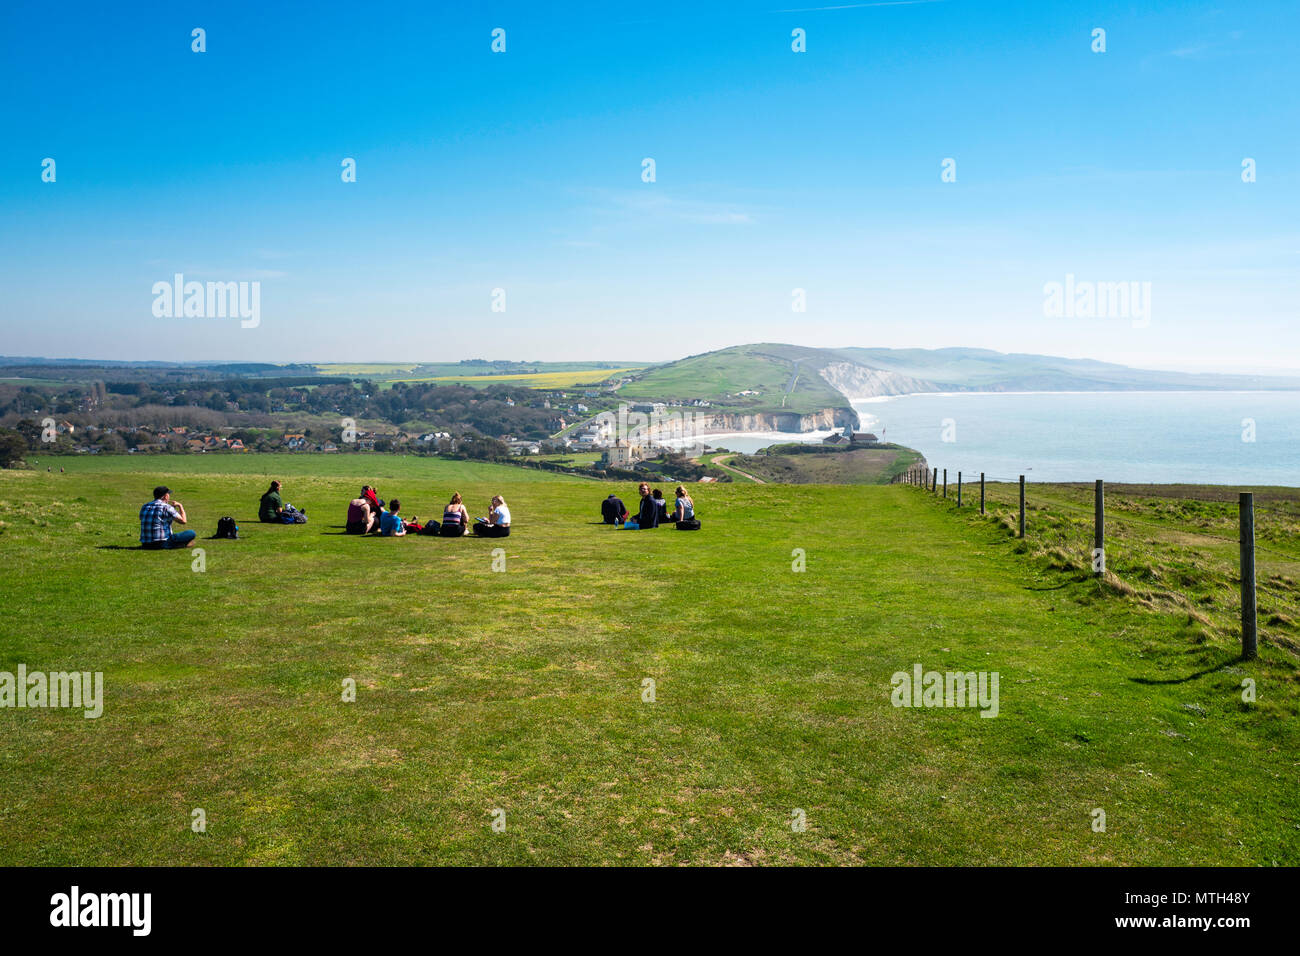 View facing east towards Freshwater Bay, on Tennyson Down, Isle of Wight, Hampshire, UK. Stock Photo